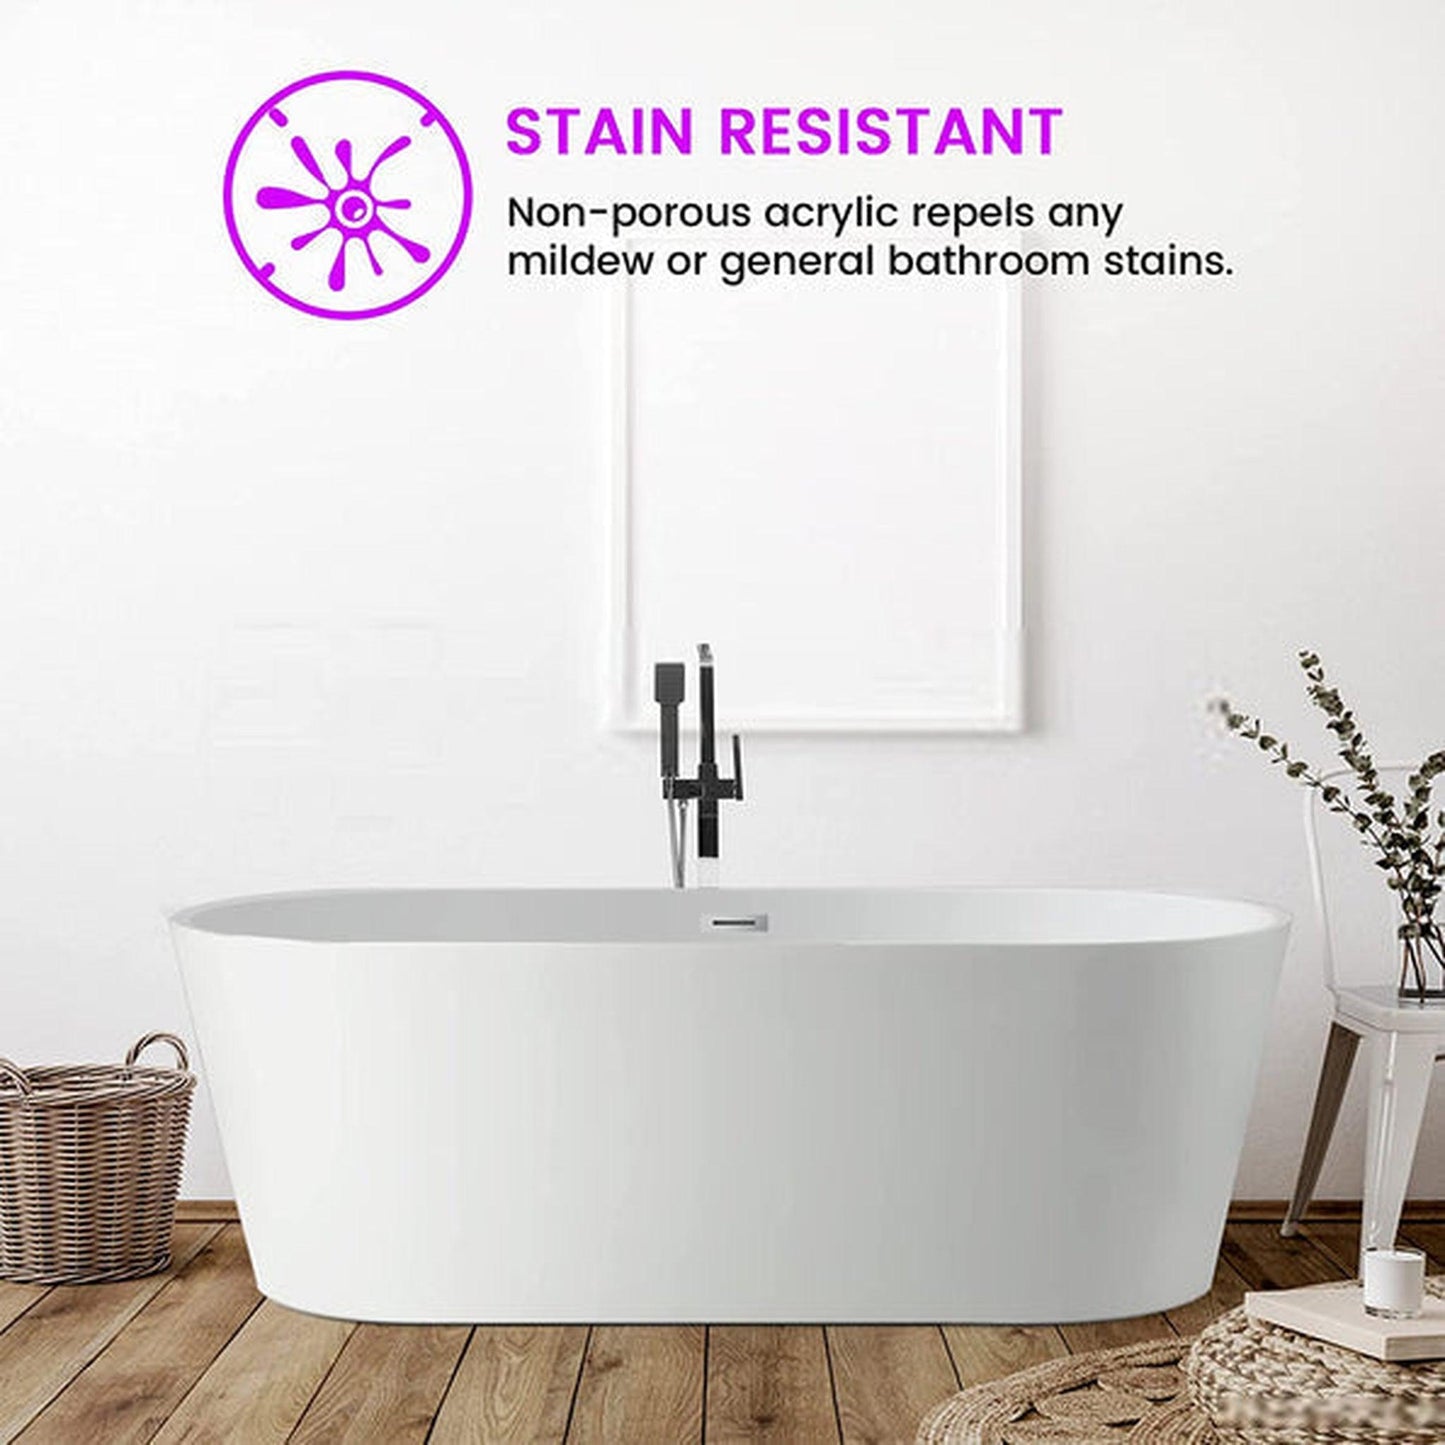 Vanity Art 54" W x 24" H White Modern Stand Alone Soaking Tub With Polished Chrome Slotted Overflow and Pop-up Drain